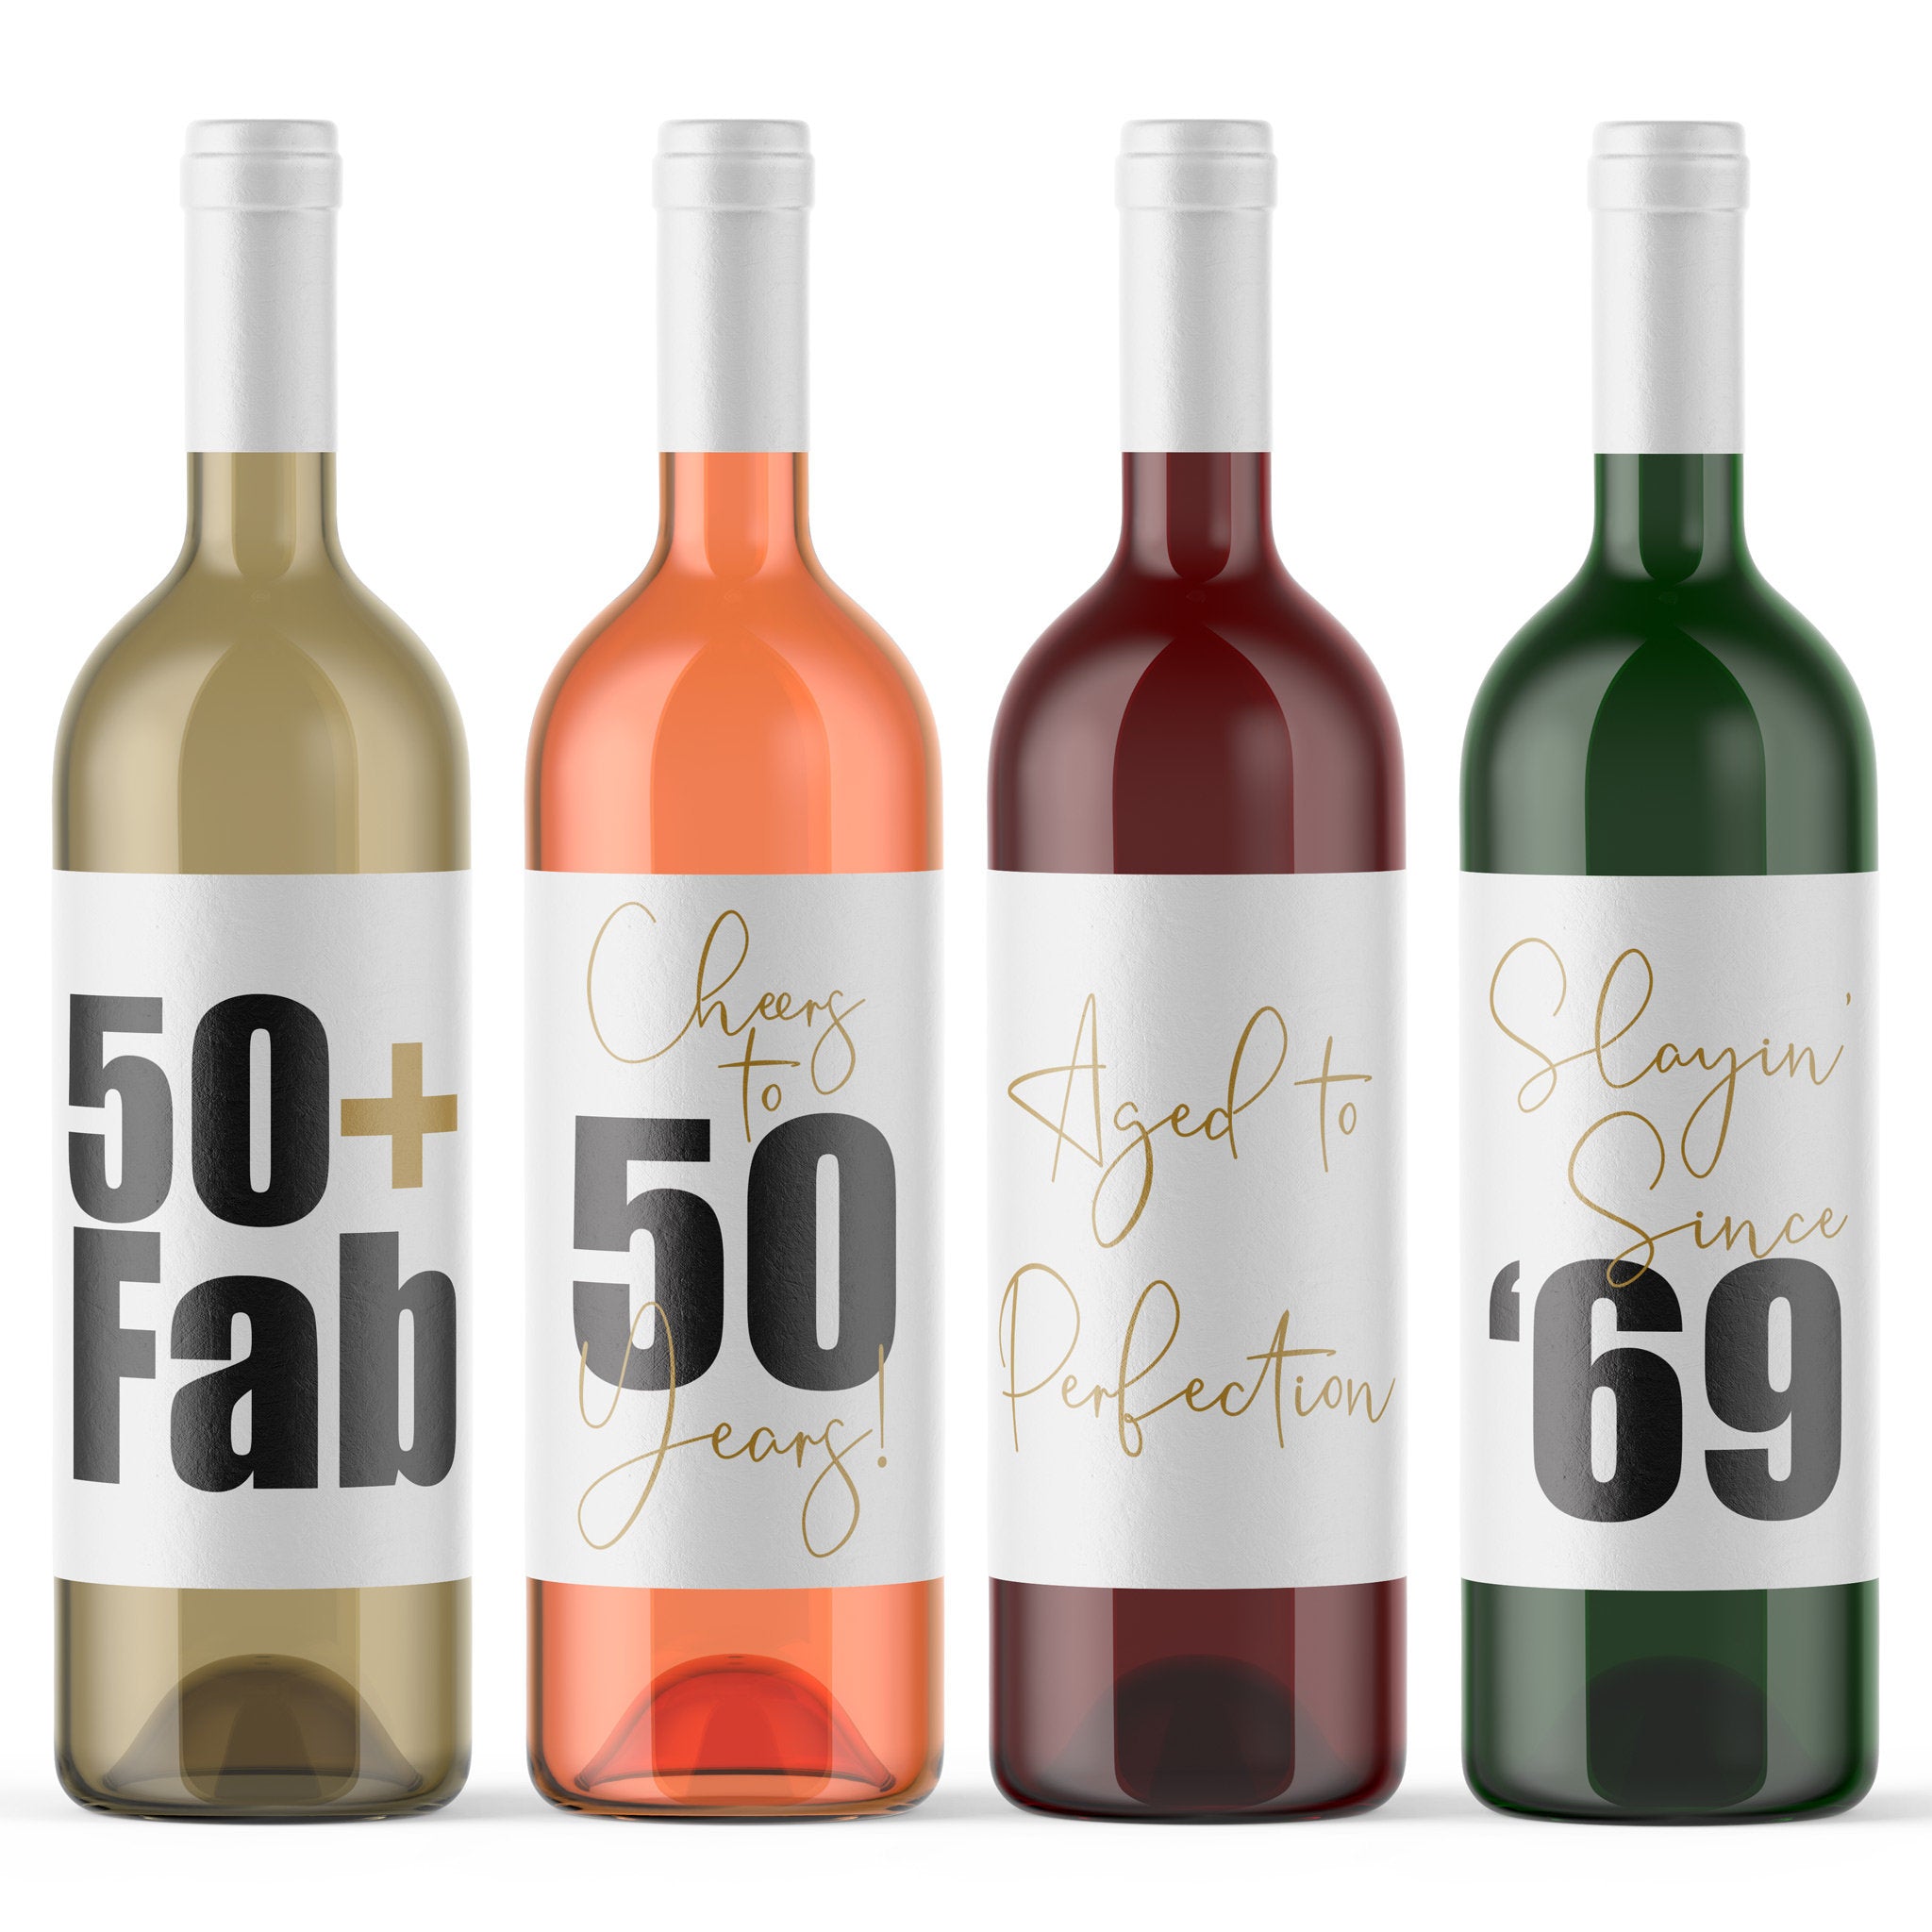 50th birthday party wine bottle labels pack of 4 funny wine labels sla